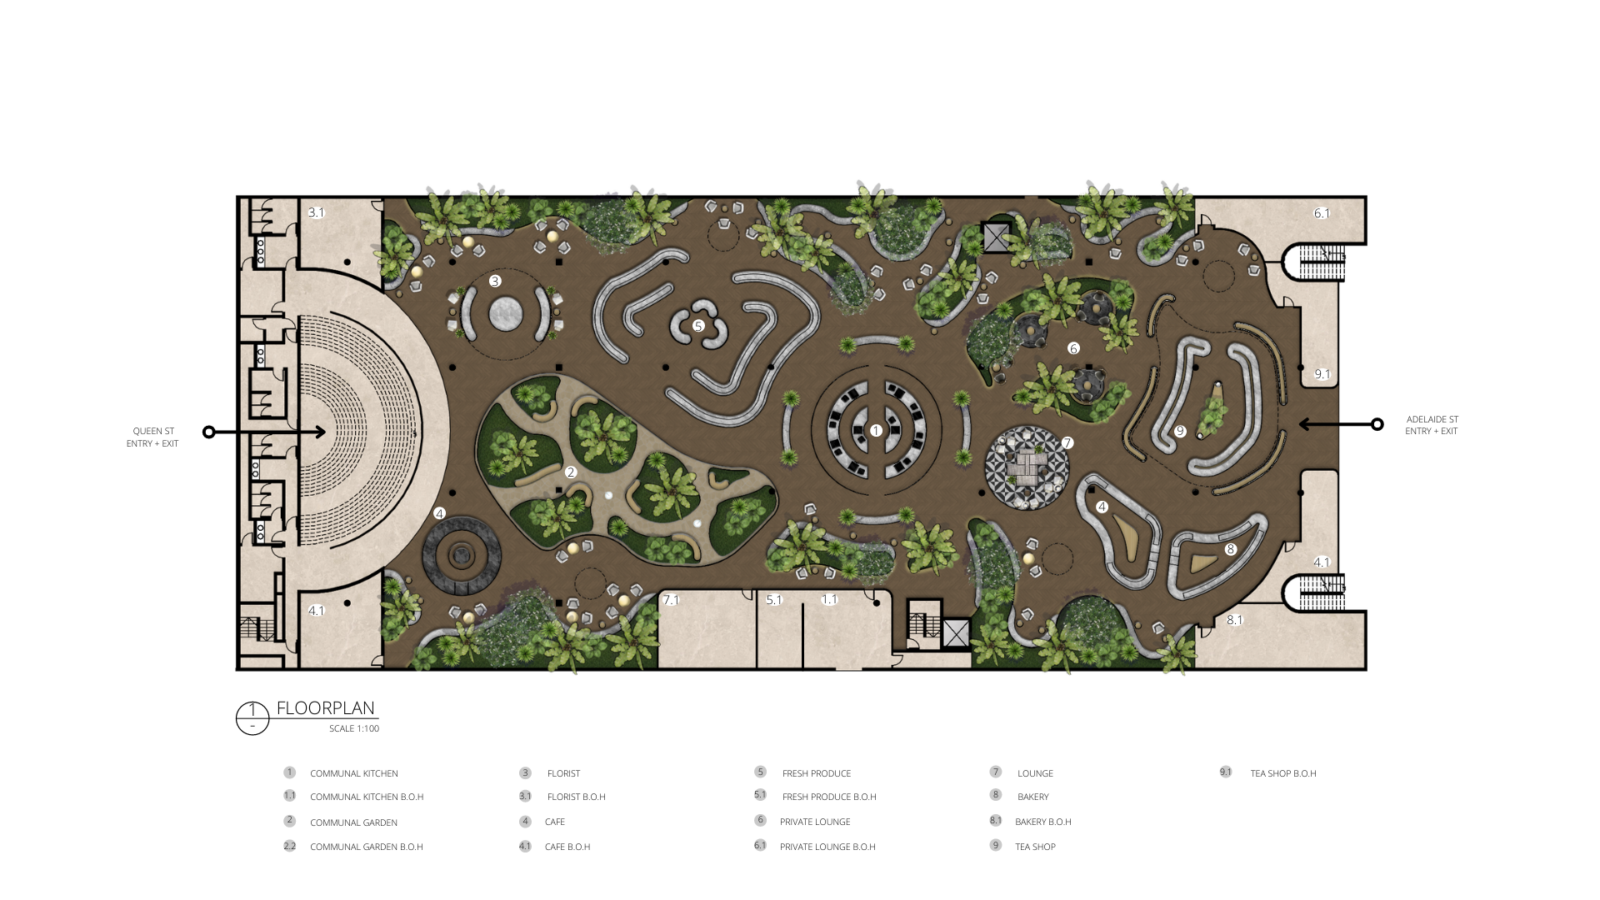 A floorplan that is inspired by the heart, with organic circulation and chambers. 